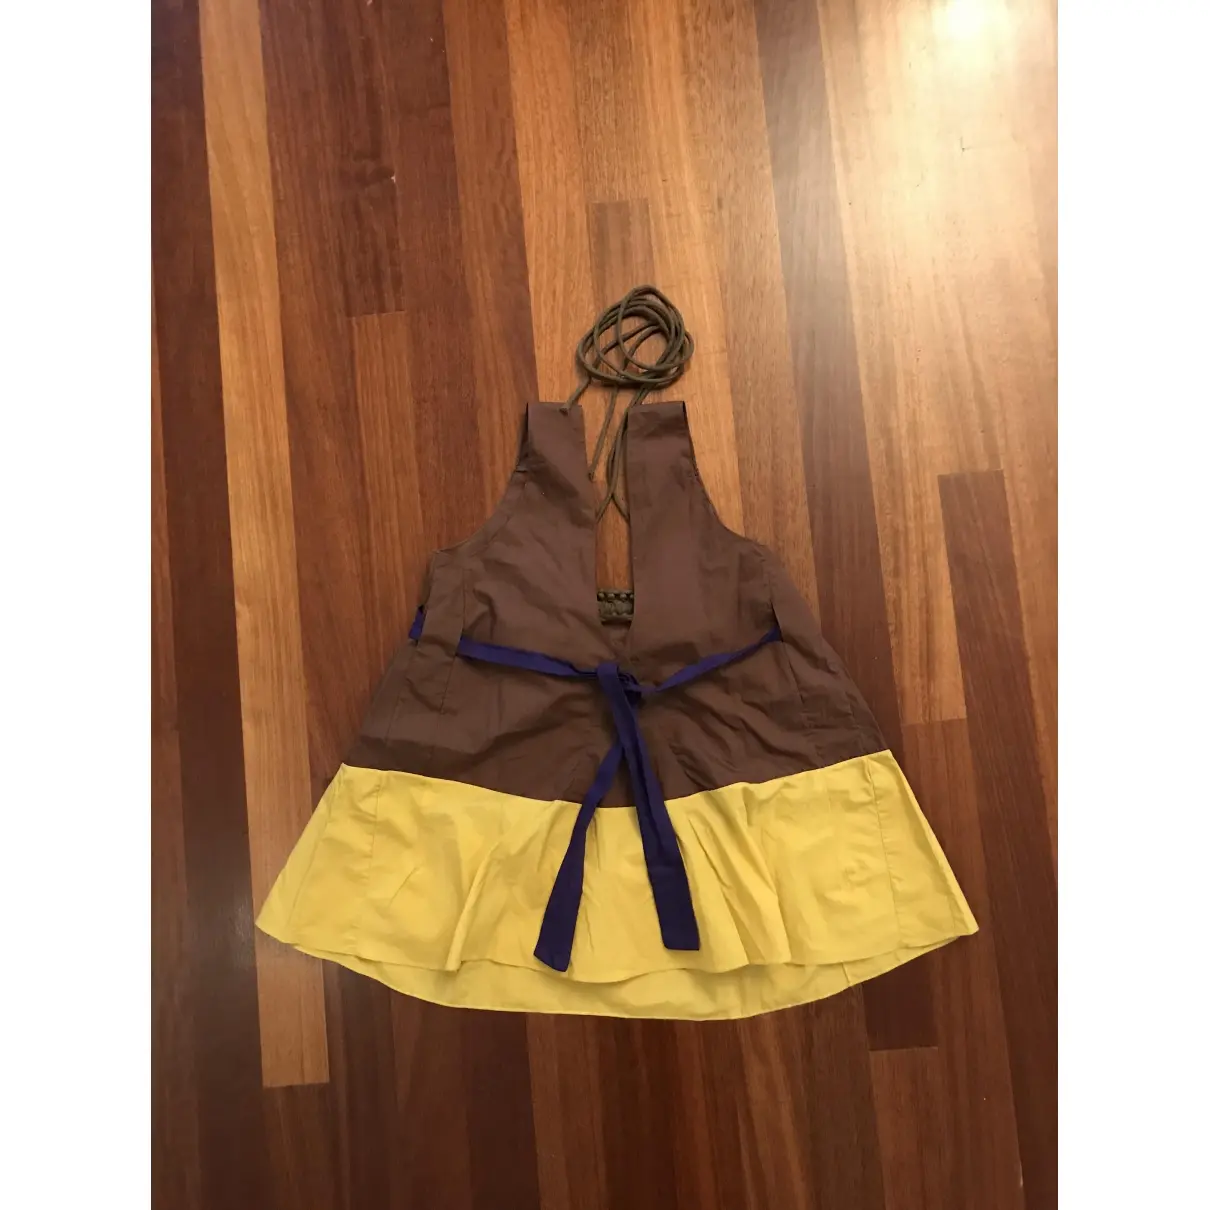 Marni Top for sale